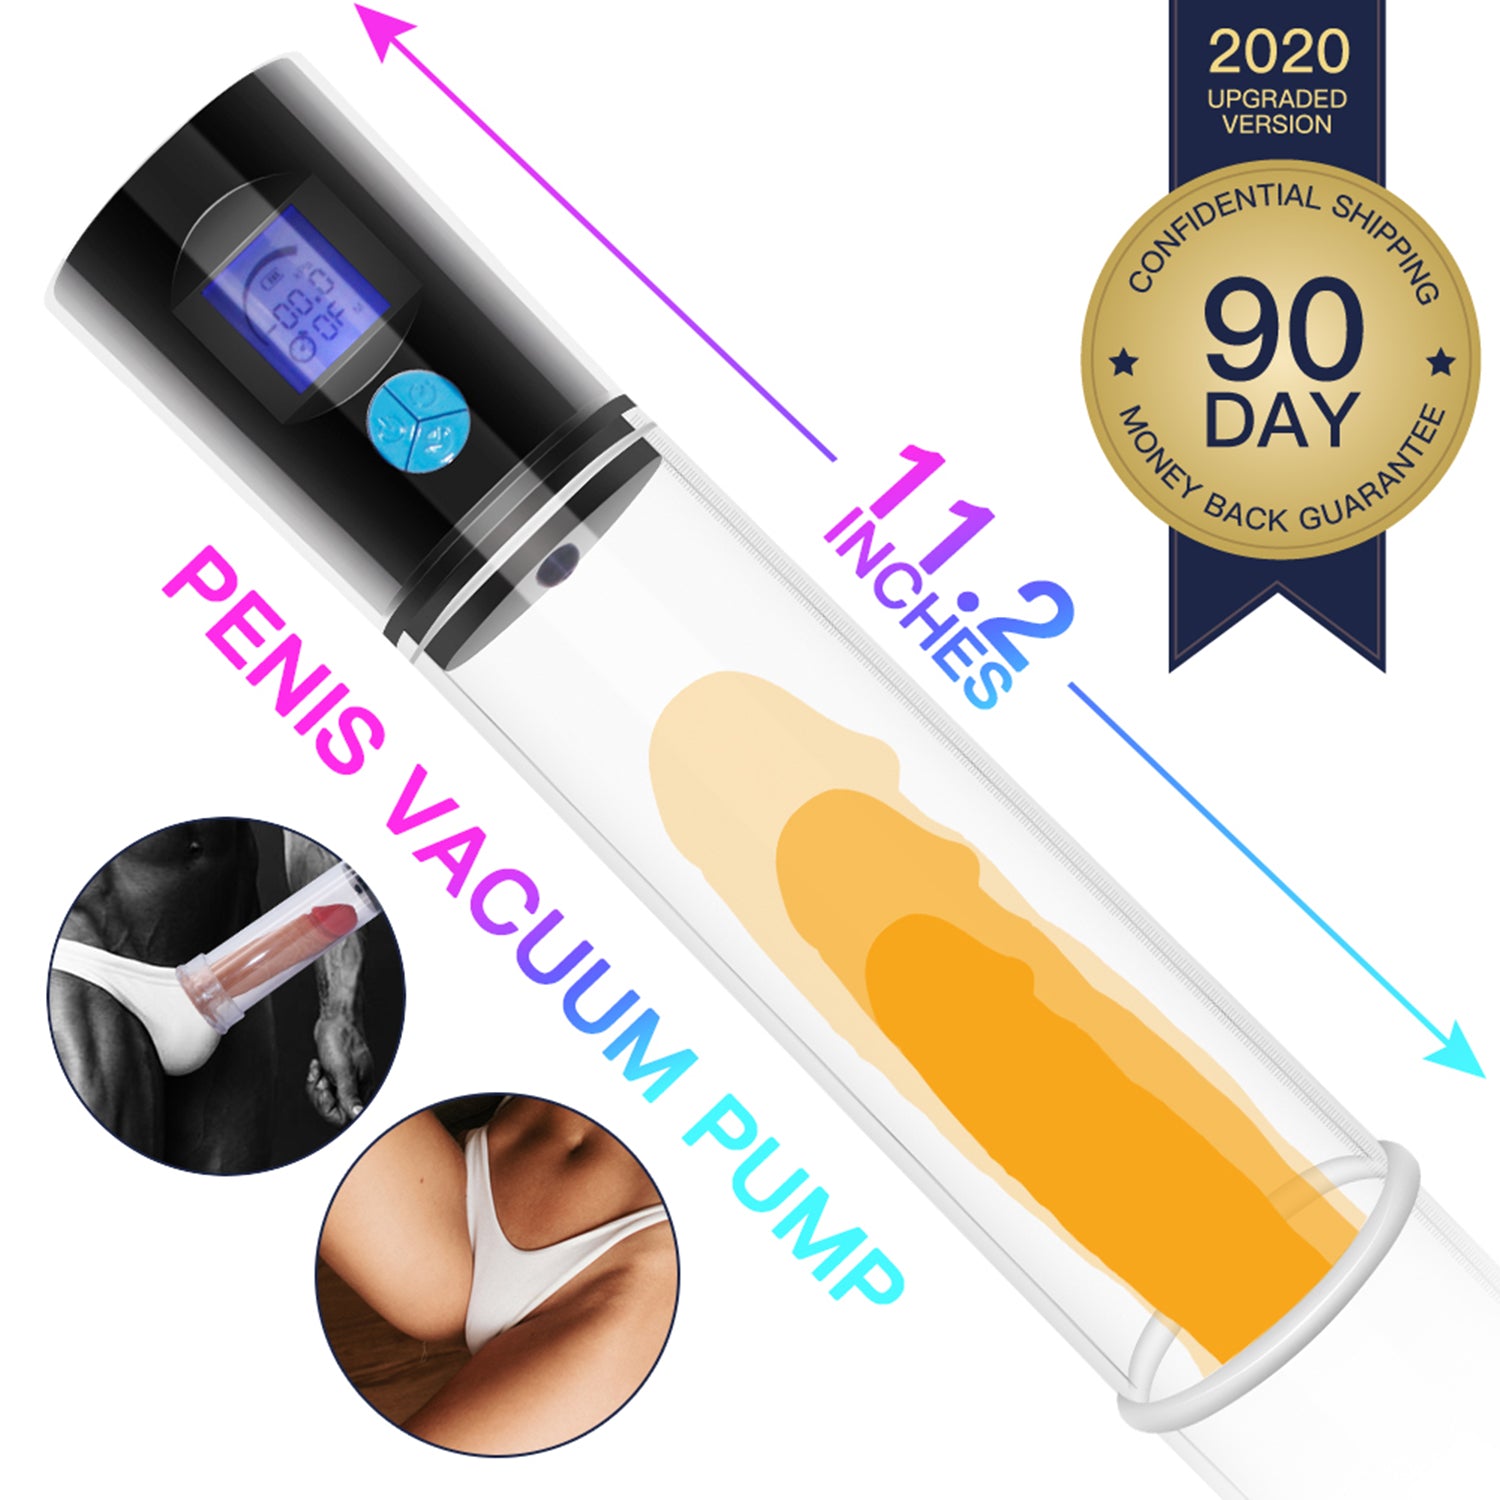 Penis Pump, 5 Suction Intensities & 6 Modes Timer Penis Erection Vacuum Pump, with Clear LED Display & Ruler Marks, USB Rechargeable Automatic Penis Pump for Man to Erection & Masturbation